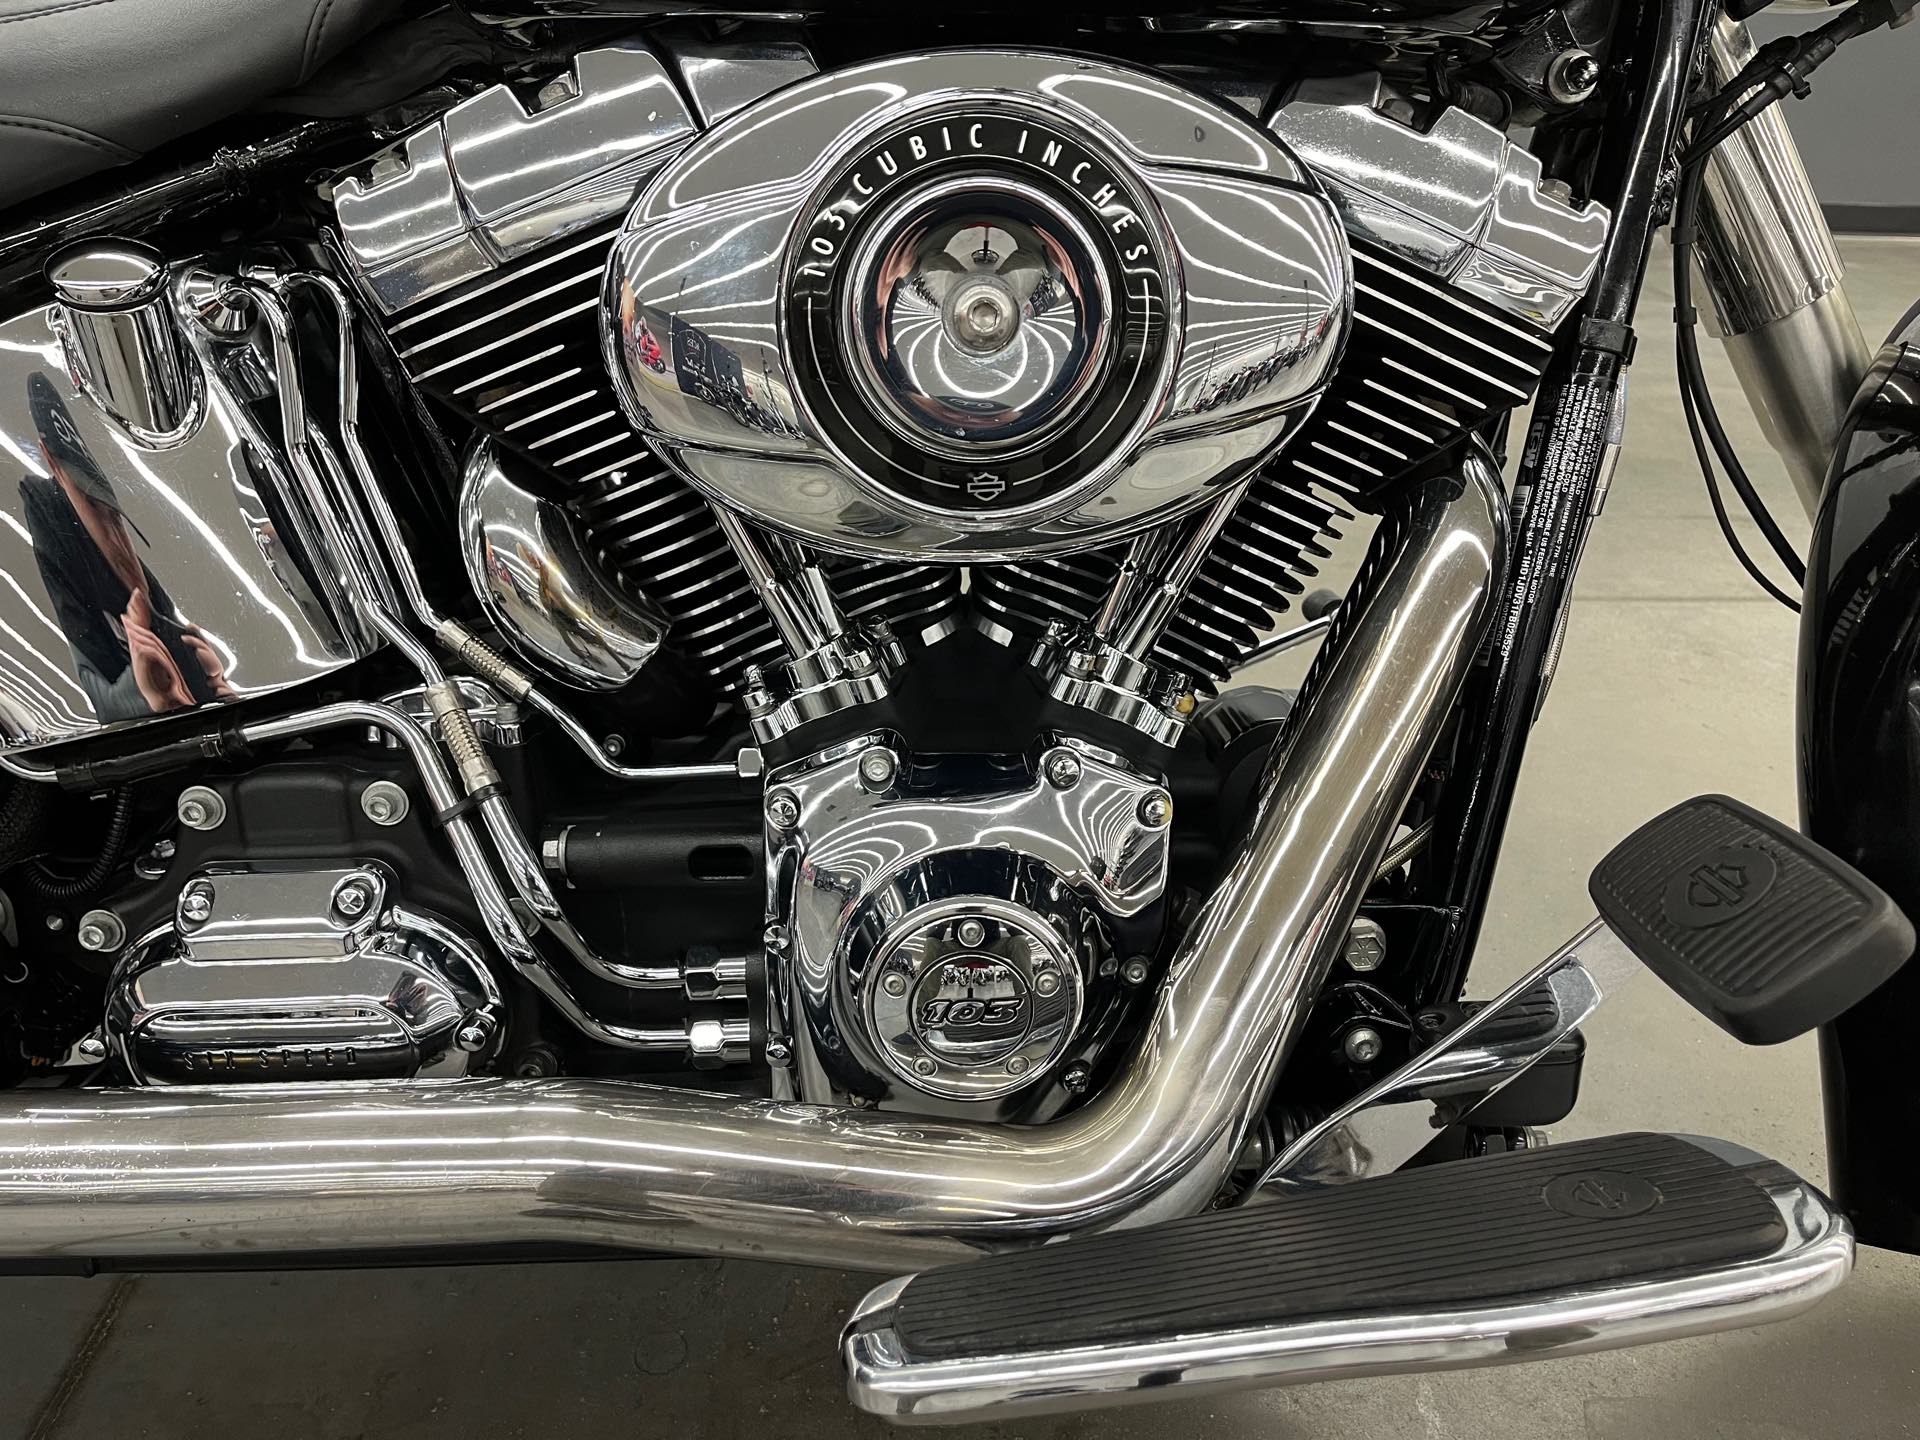 2015 Harley-Davidson Softail Deluxe at Aces Motorcycles - Denver